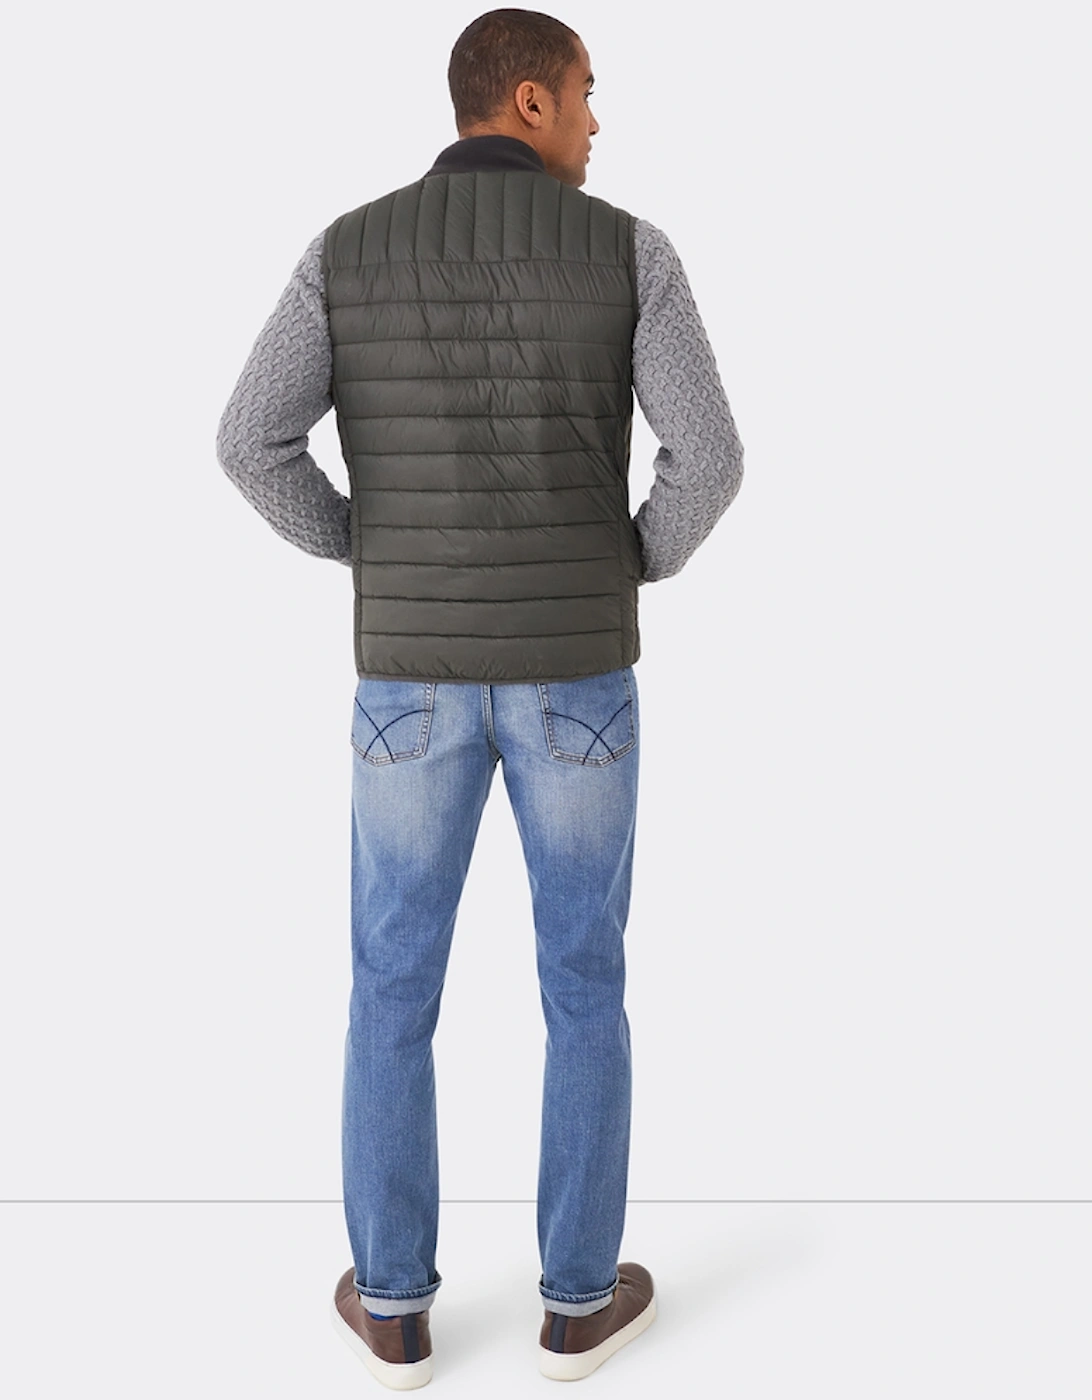 Mens Lowther Casual Bodywarmer Gilet